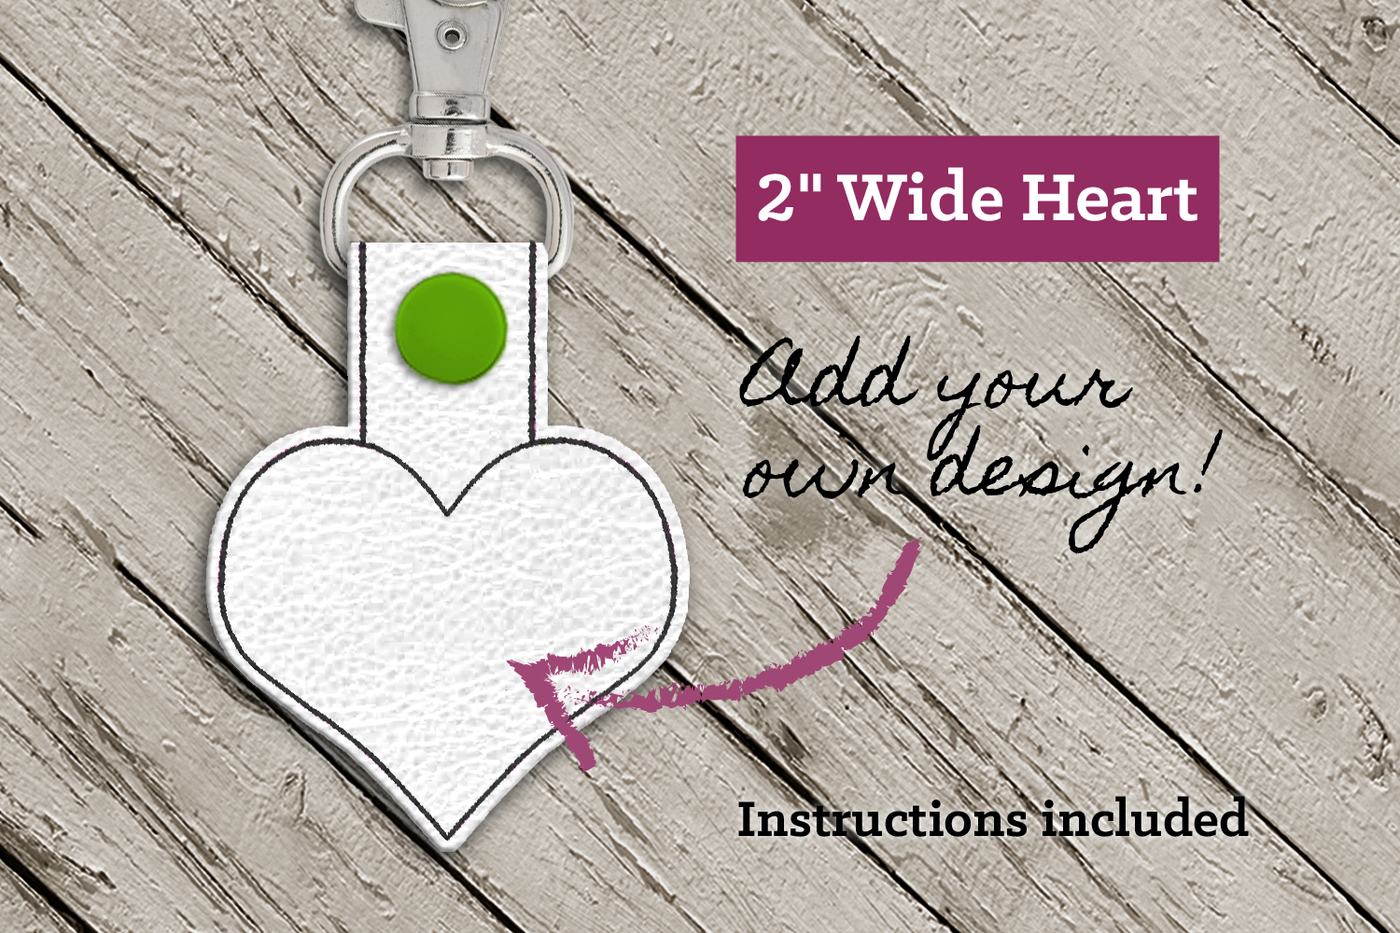 2 inch wide heart key fob ITH design. Instructions included and add your own design to the heart.